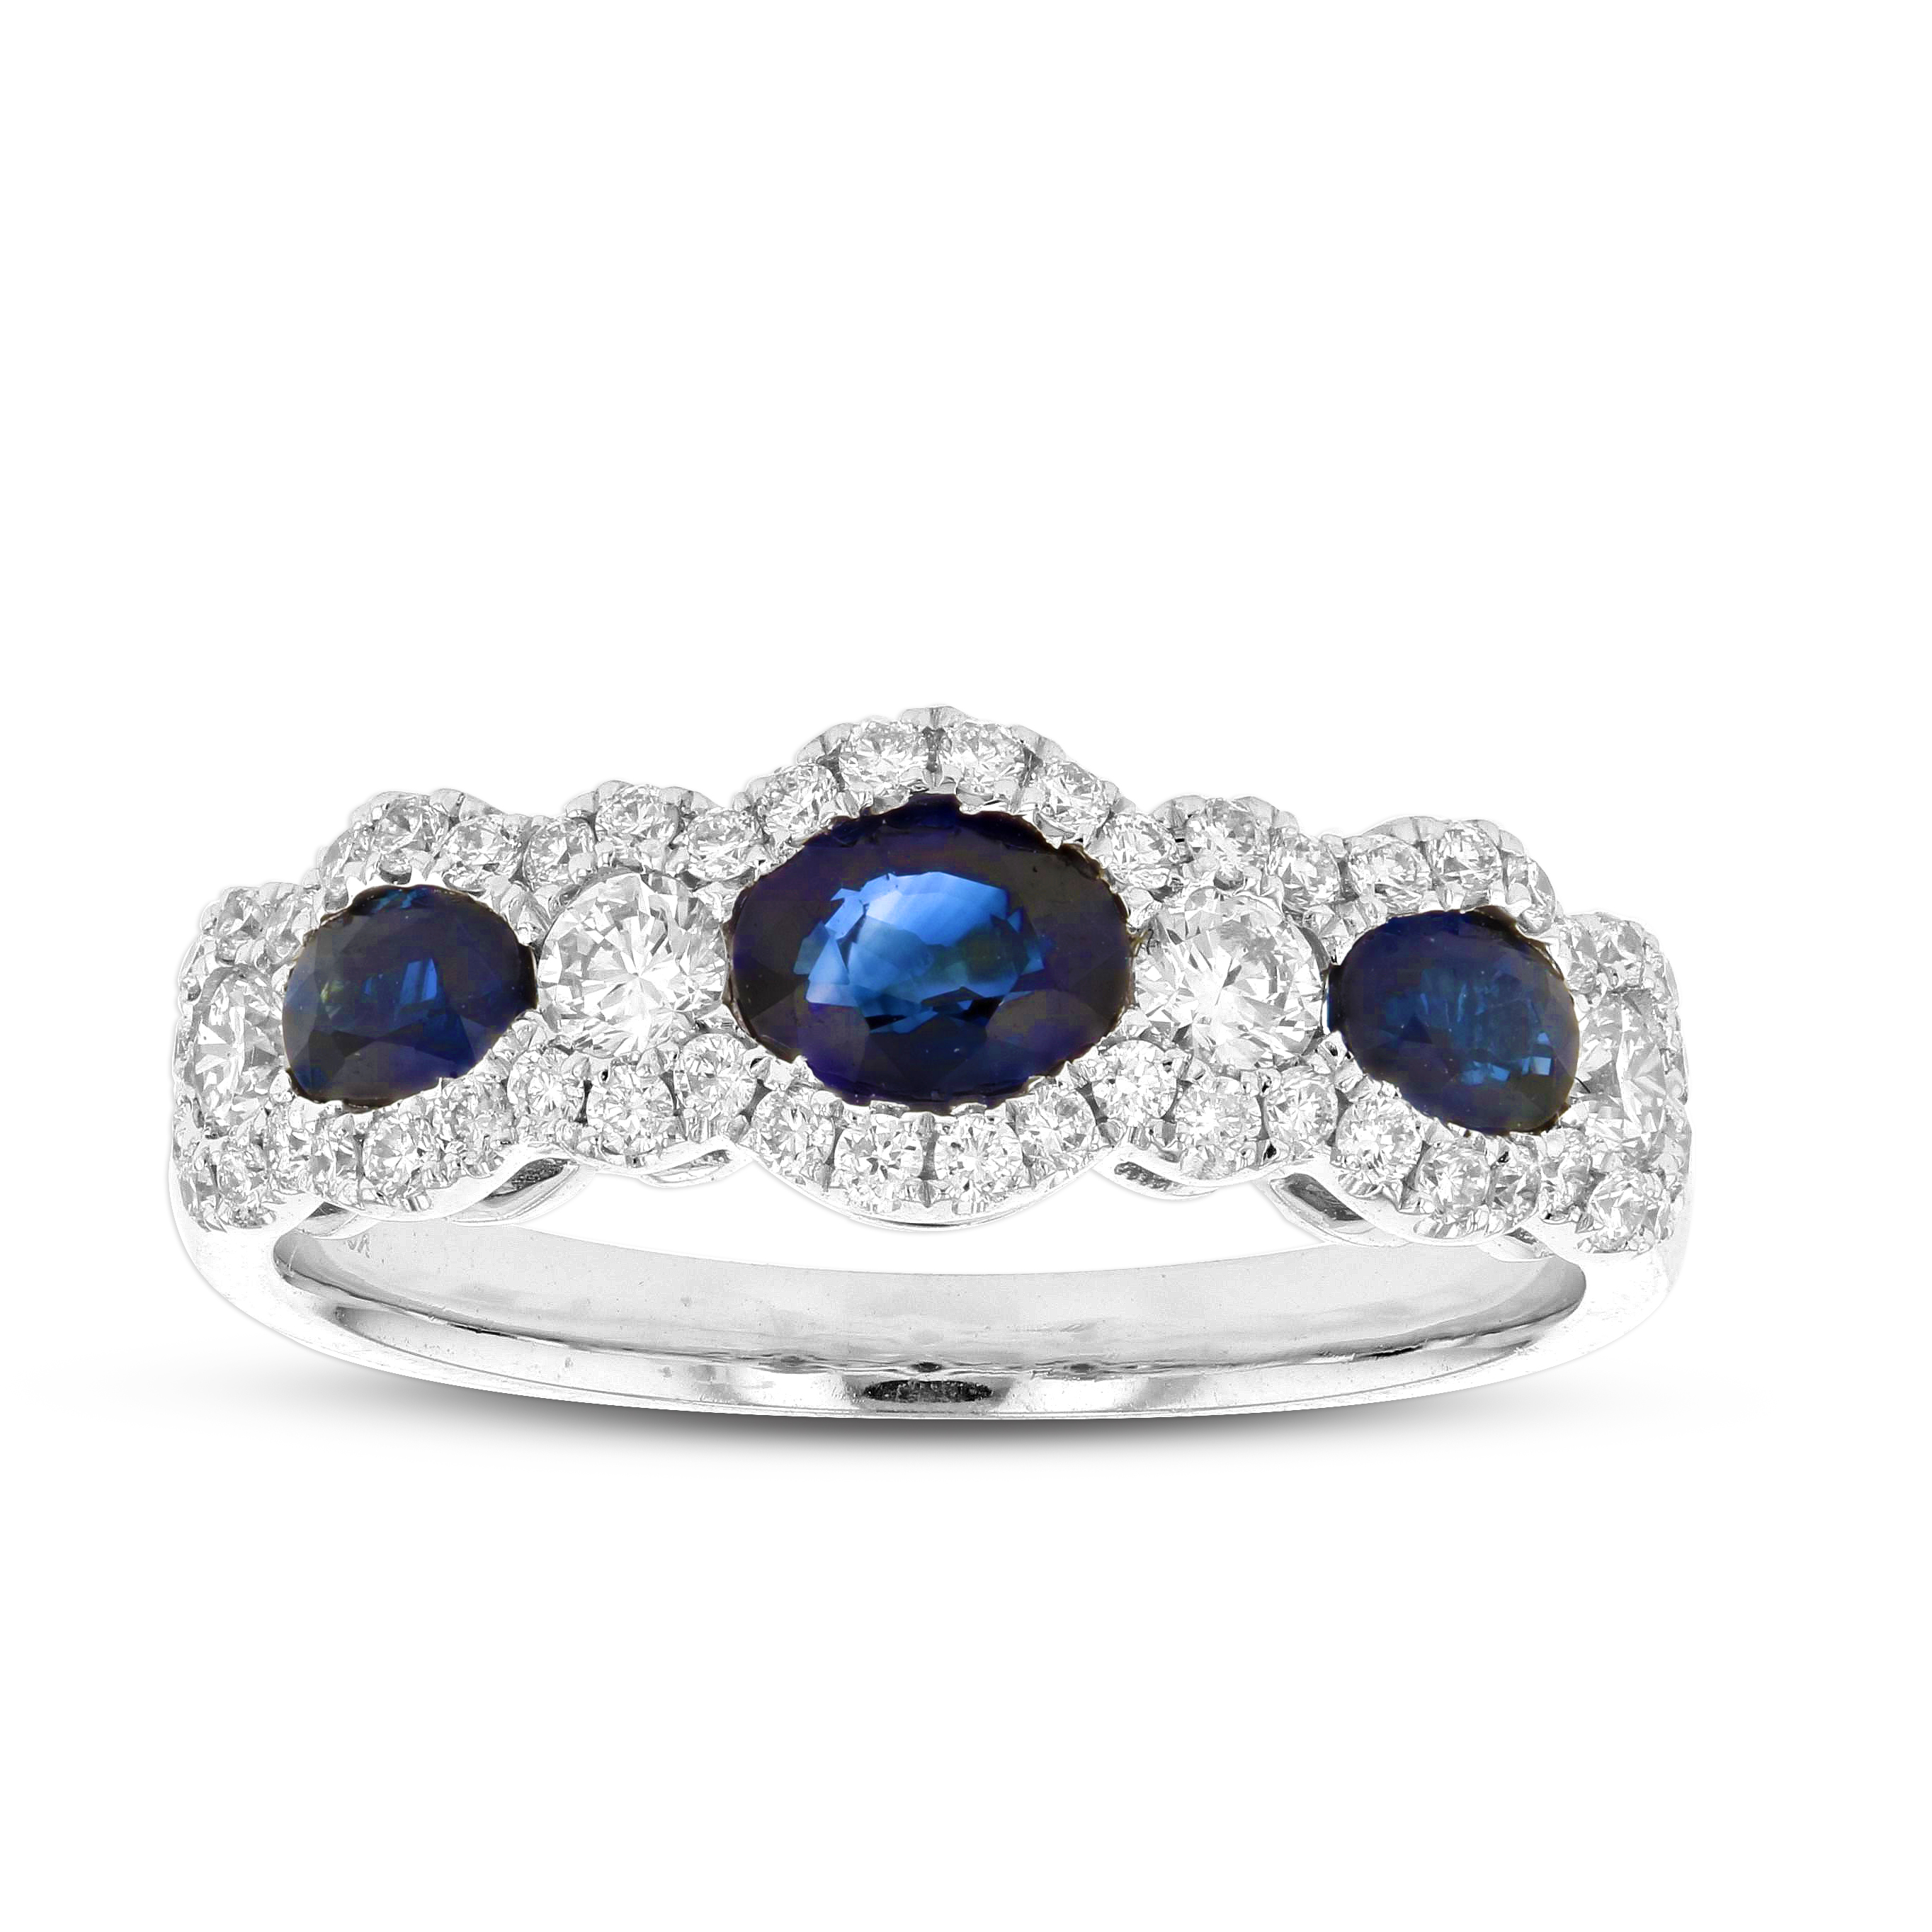 View 1.49ctw Diamond and Sapphire Band in 18k White Gold